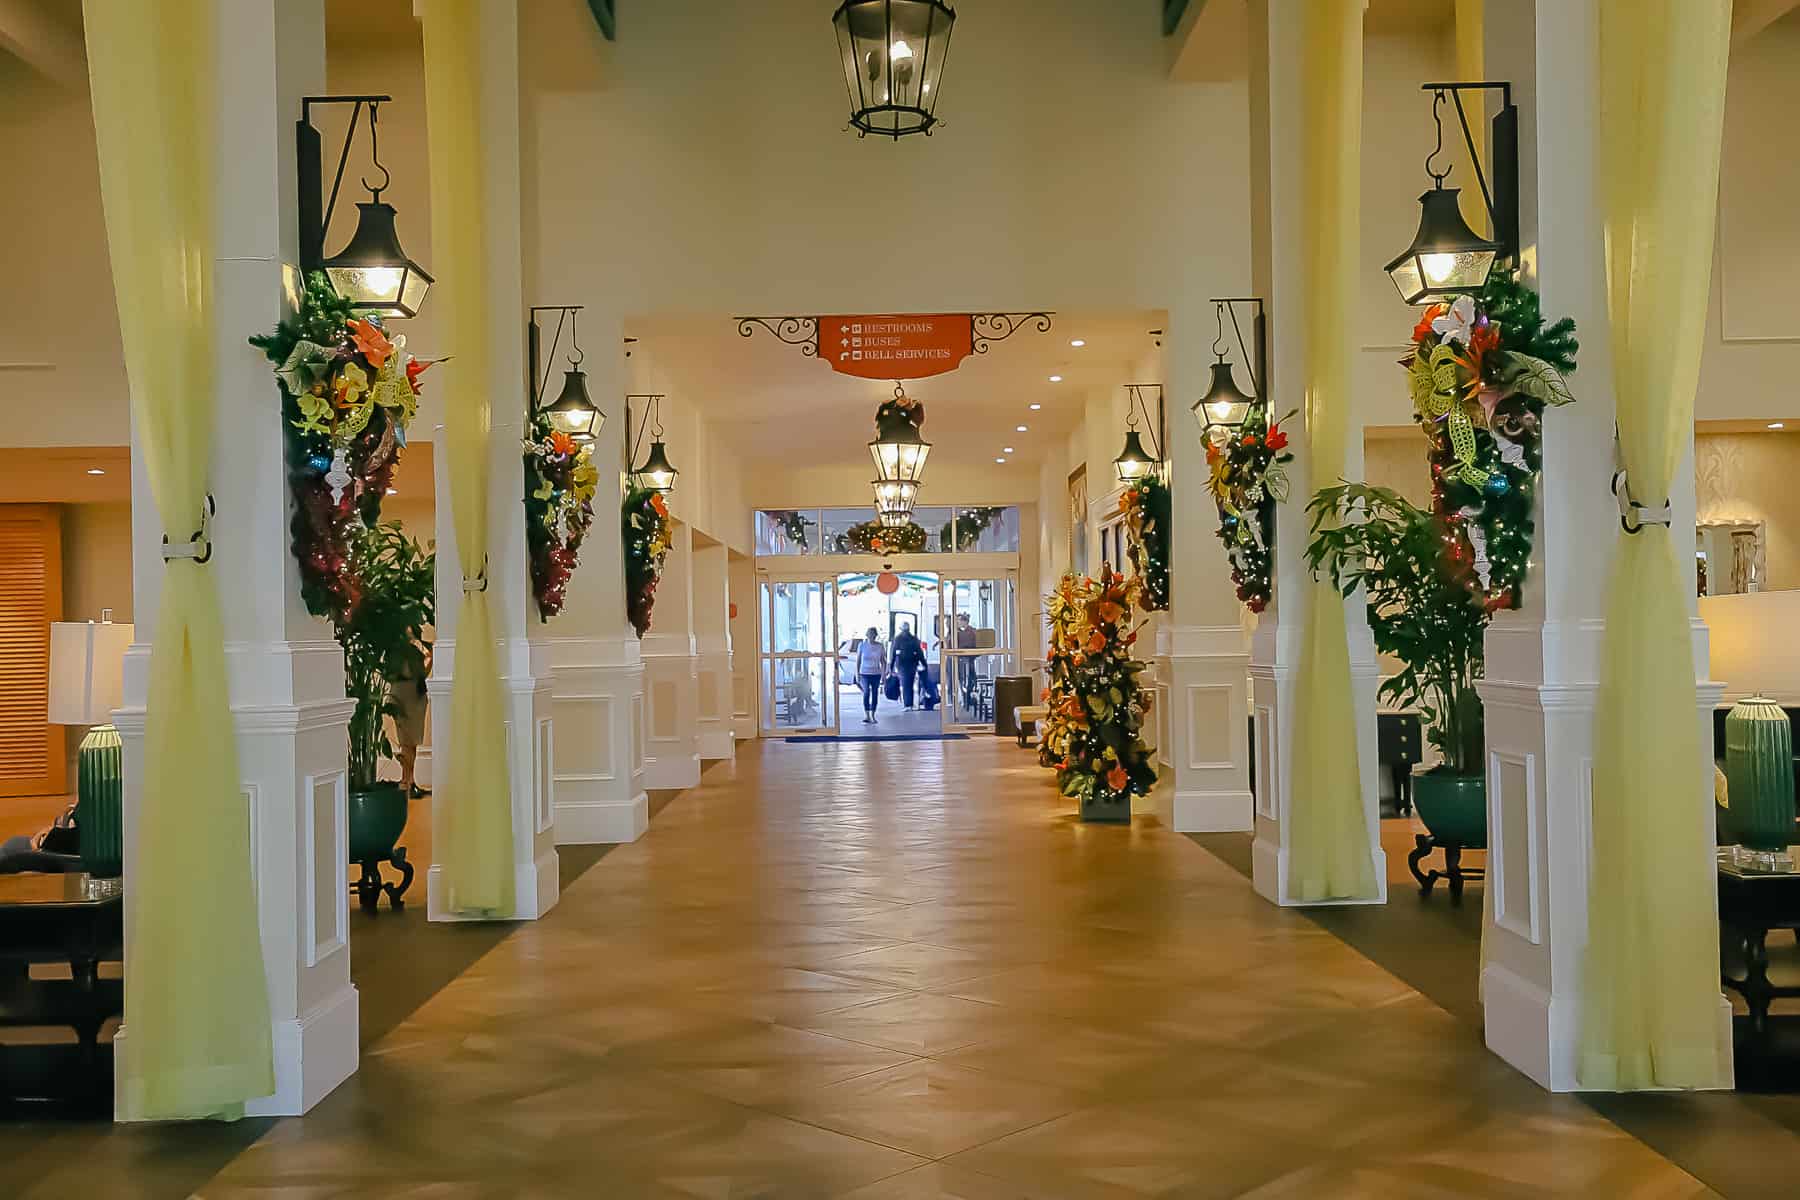 The entrance hall at Disney's Caribbean Beach decorated for the holidays. 